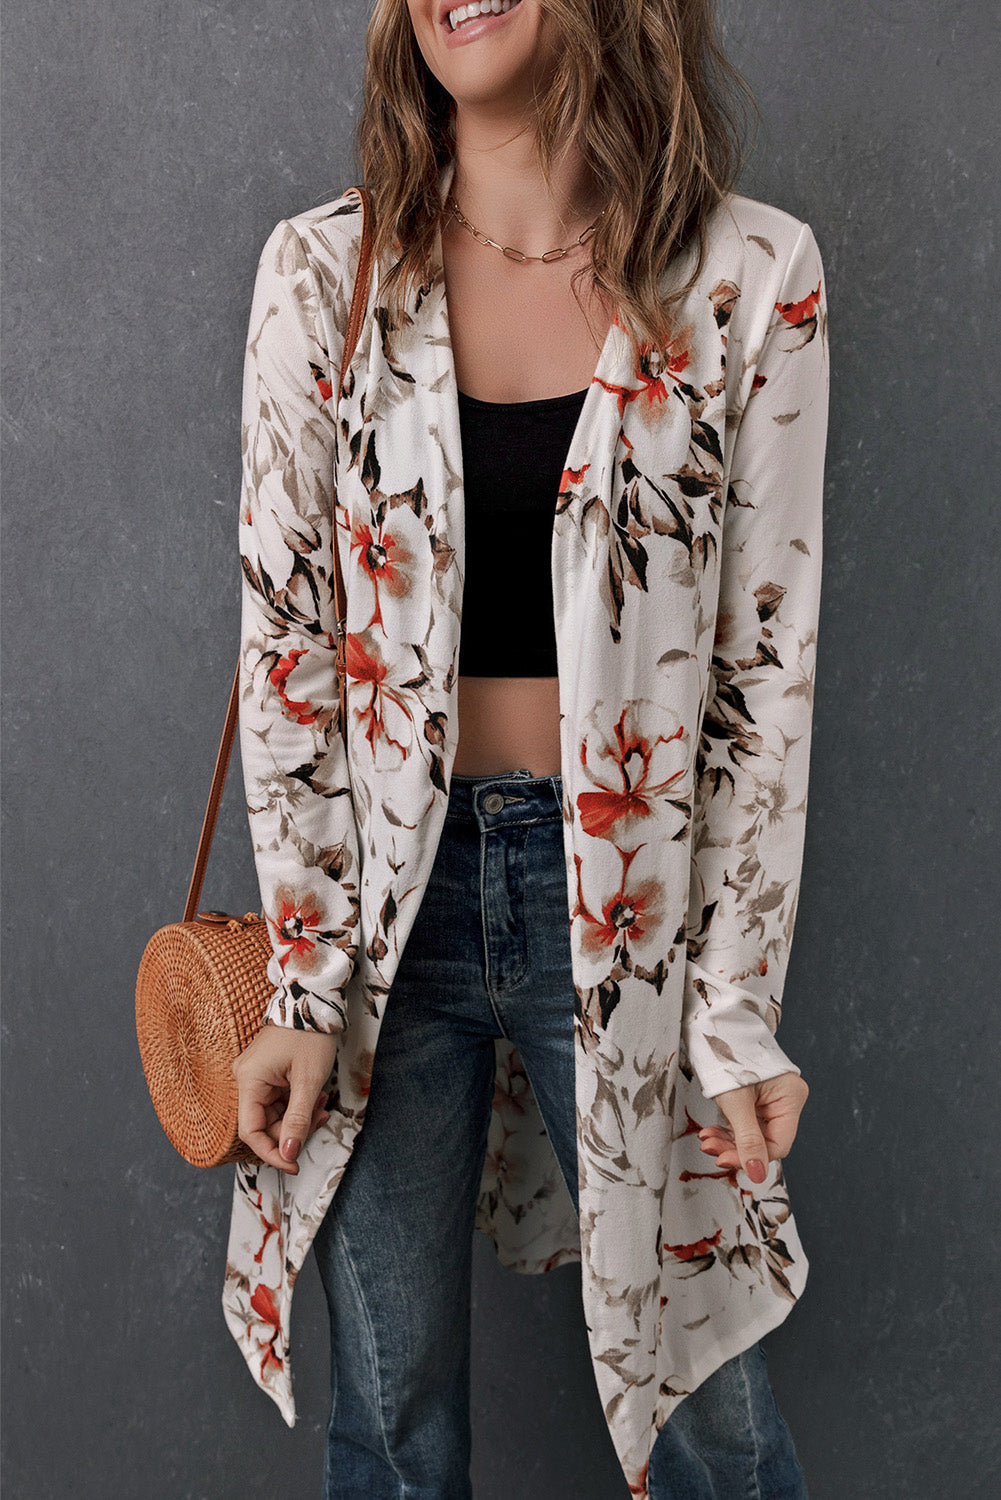 Double Take Printed Open Front Longline Cardigan